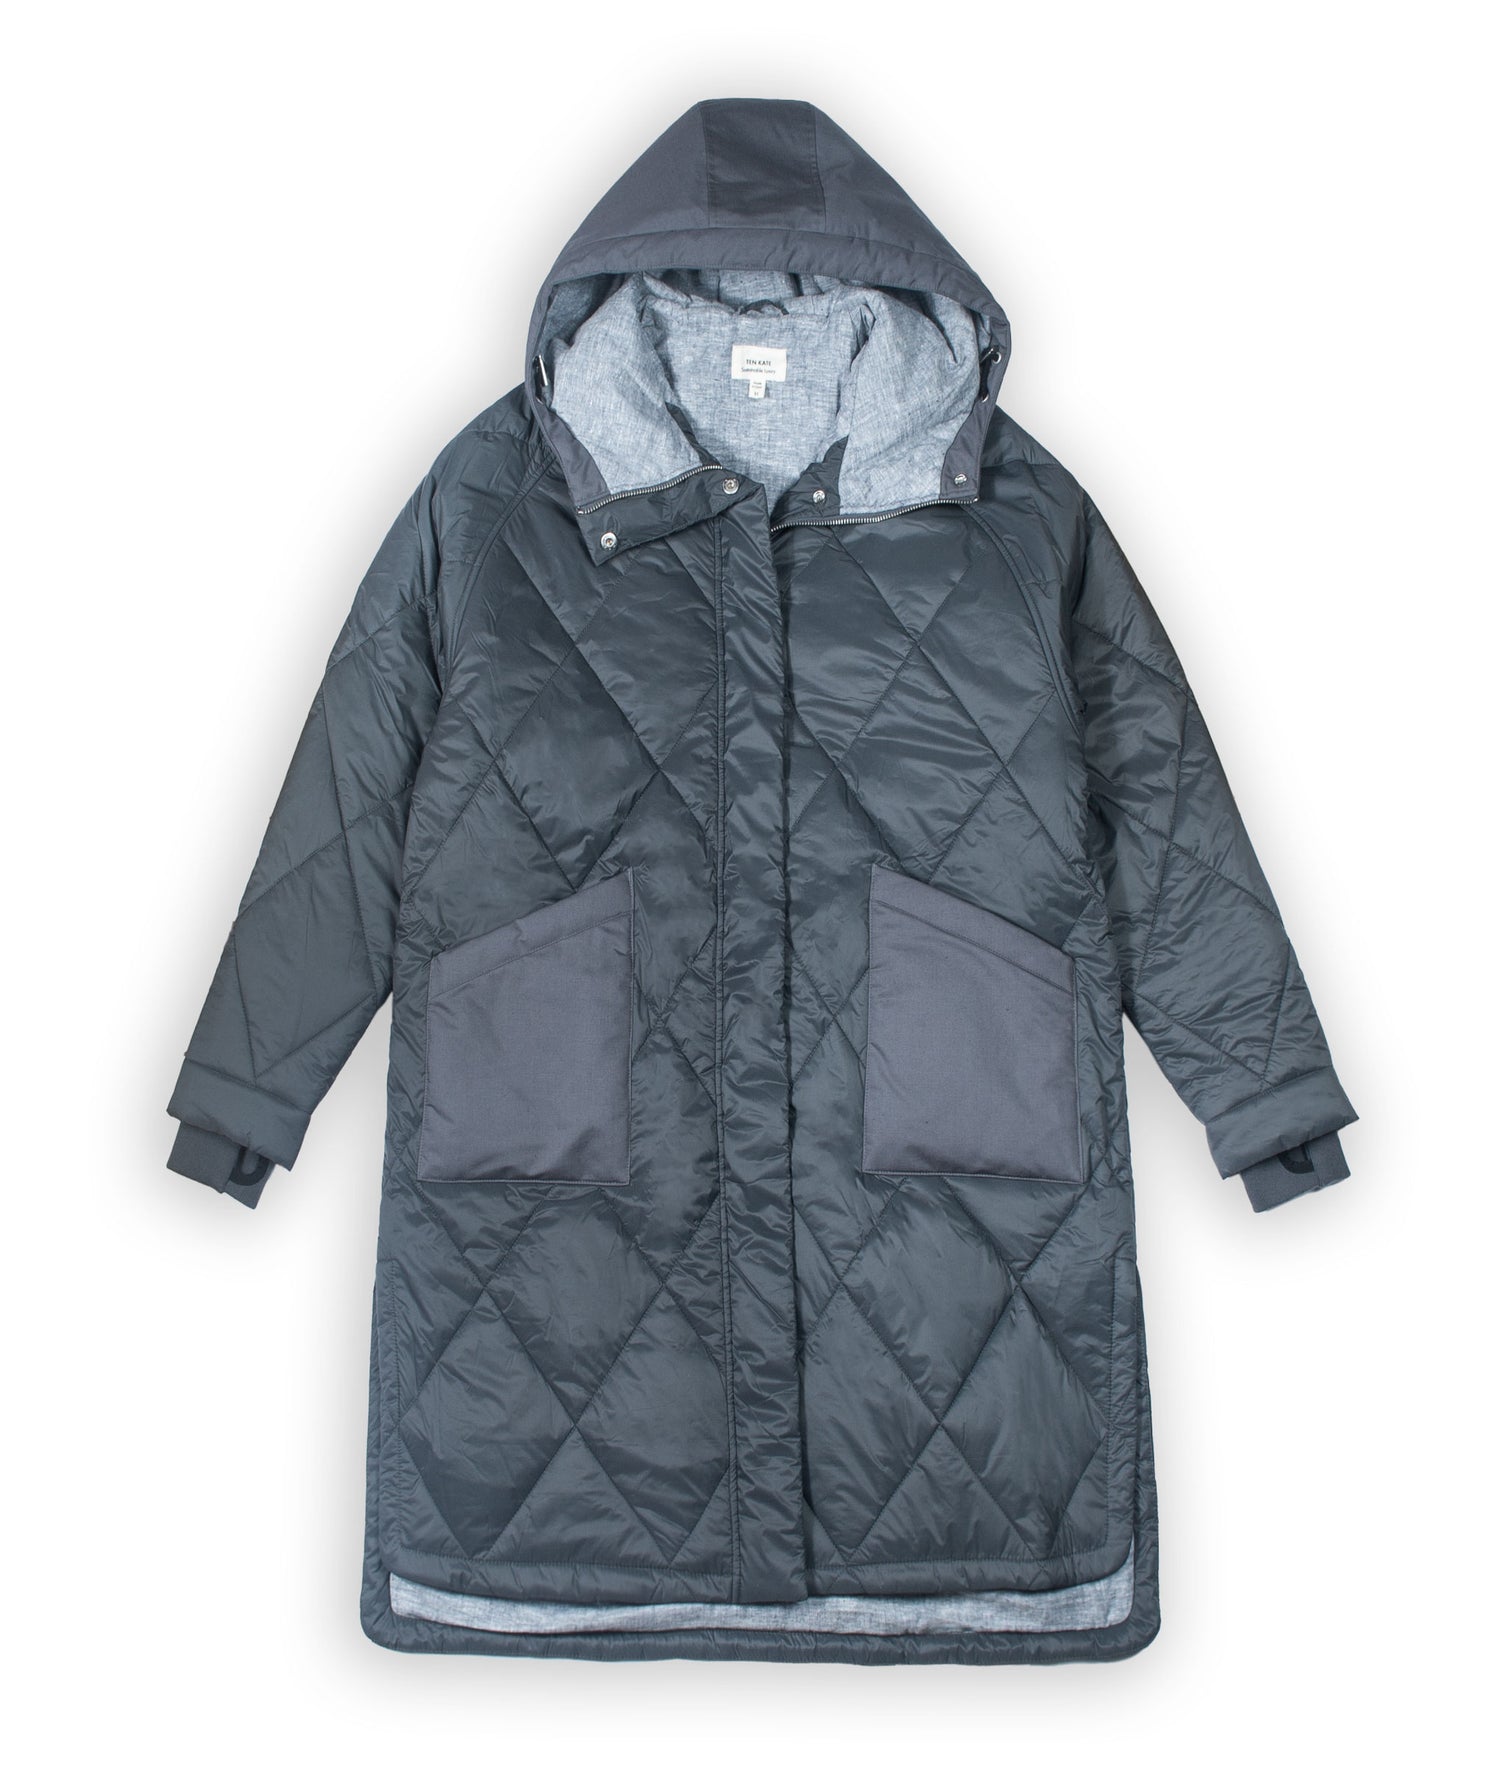 Sustainable cool grey oversized hemp puffer coat made from 100% deadstock fabrics. Featuring a soft lightweight insulation made from certified recycled PET from Repreve® that is 100% vegan and cruelty-free. Full Product View